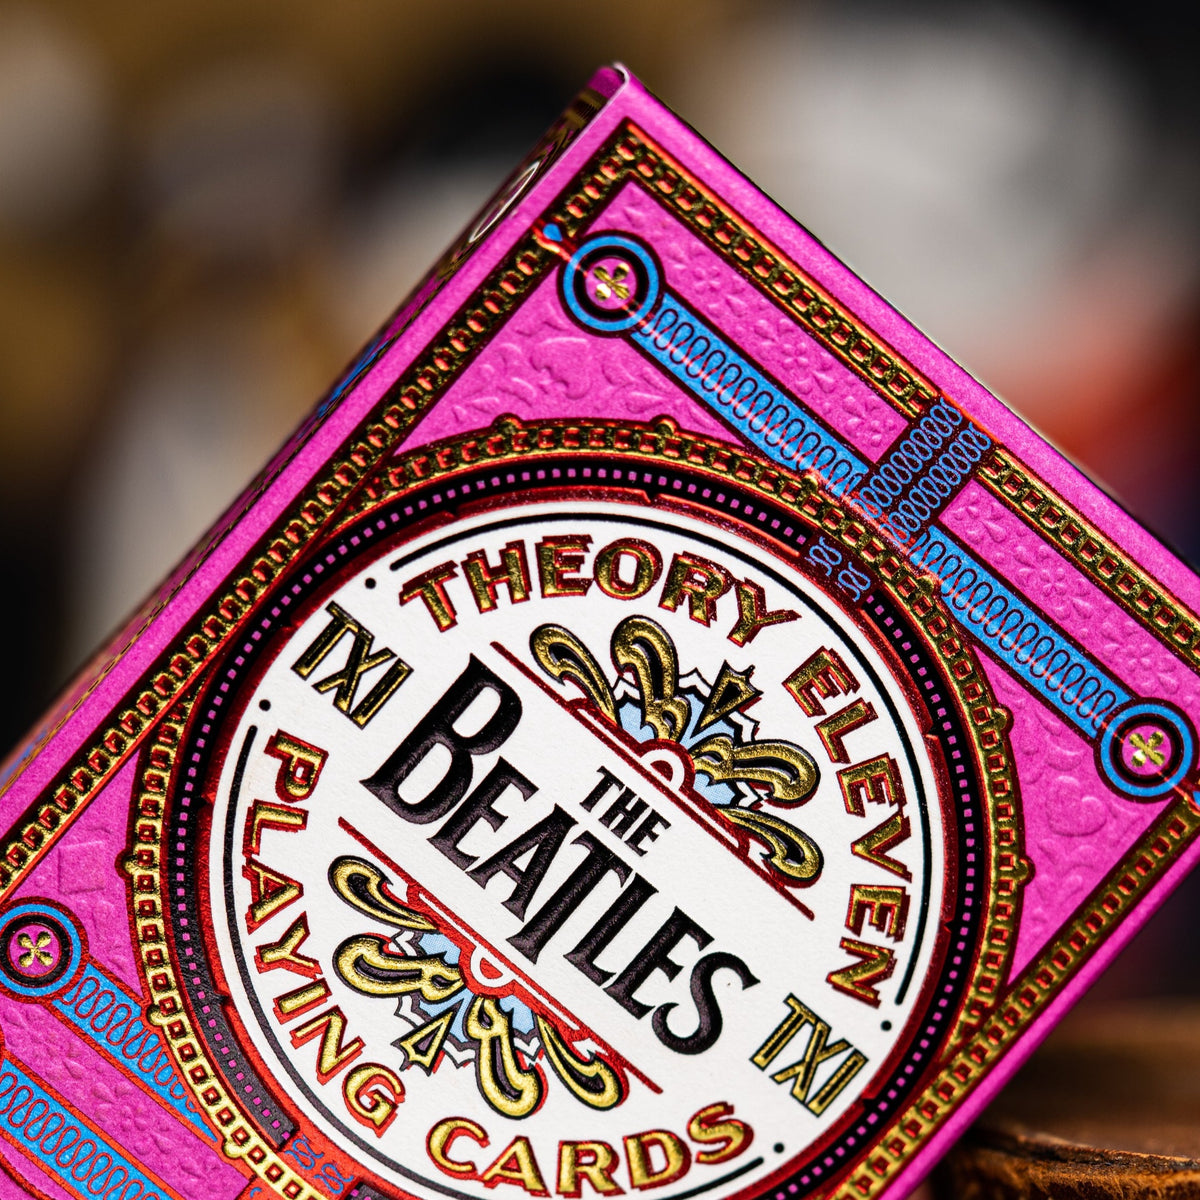 Theory 11 - The Beatles